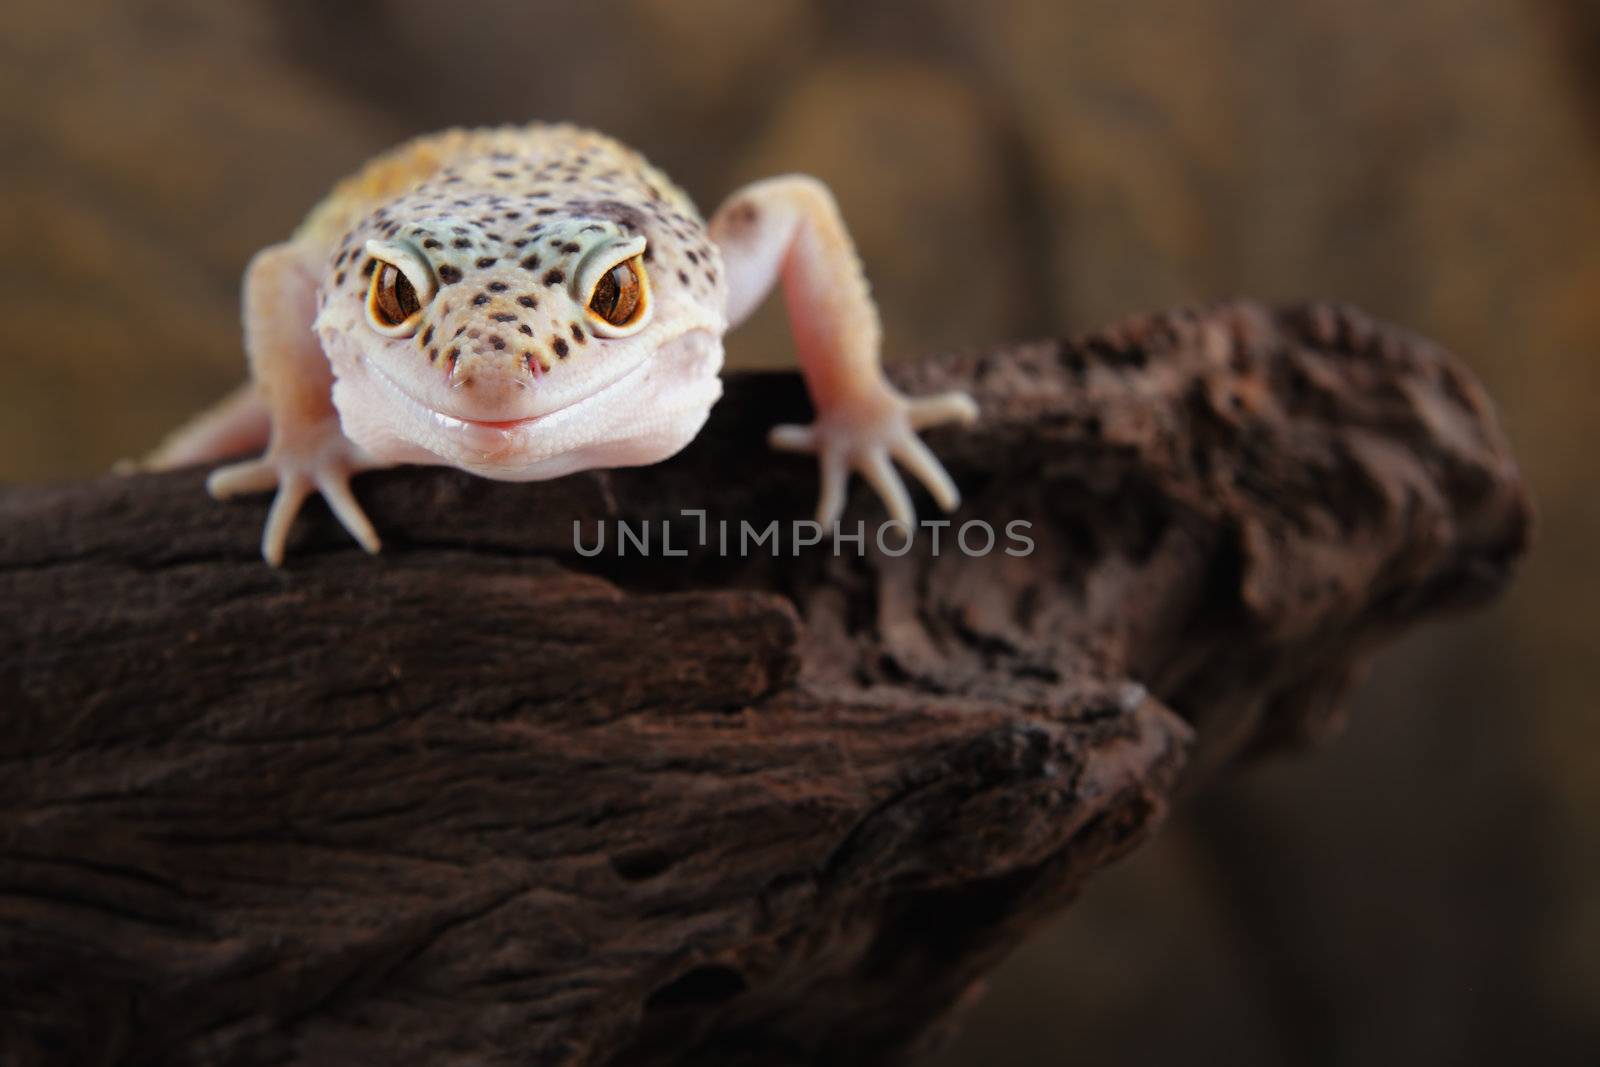 picture of a beautiful leopard gecko